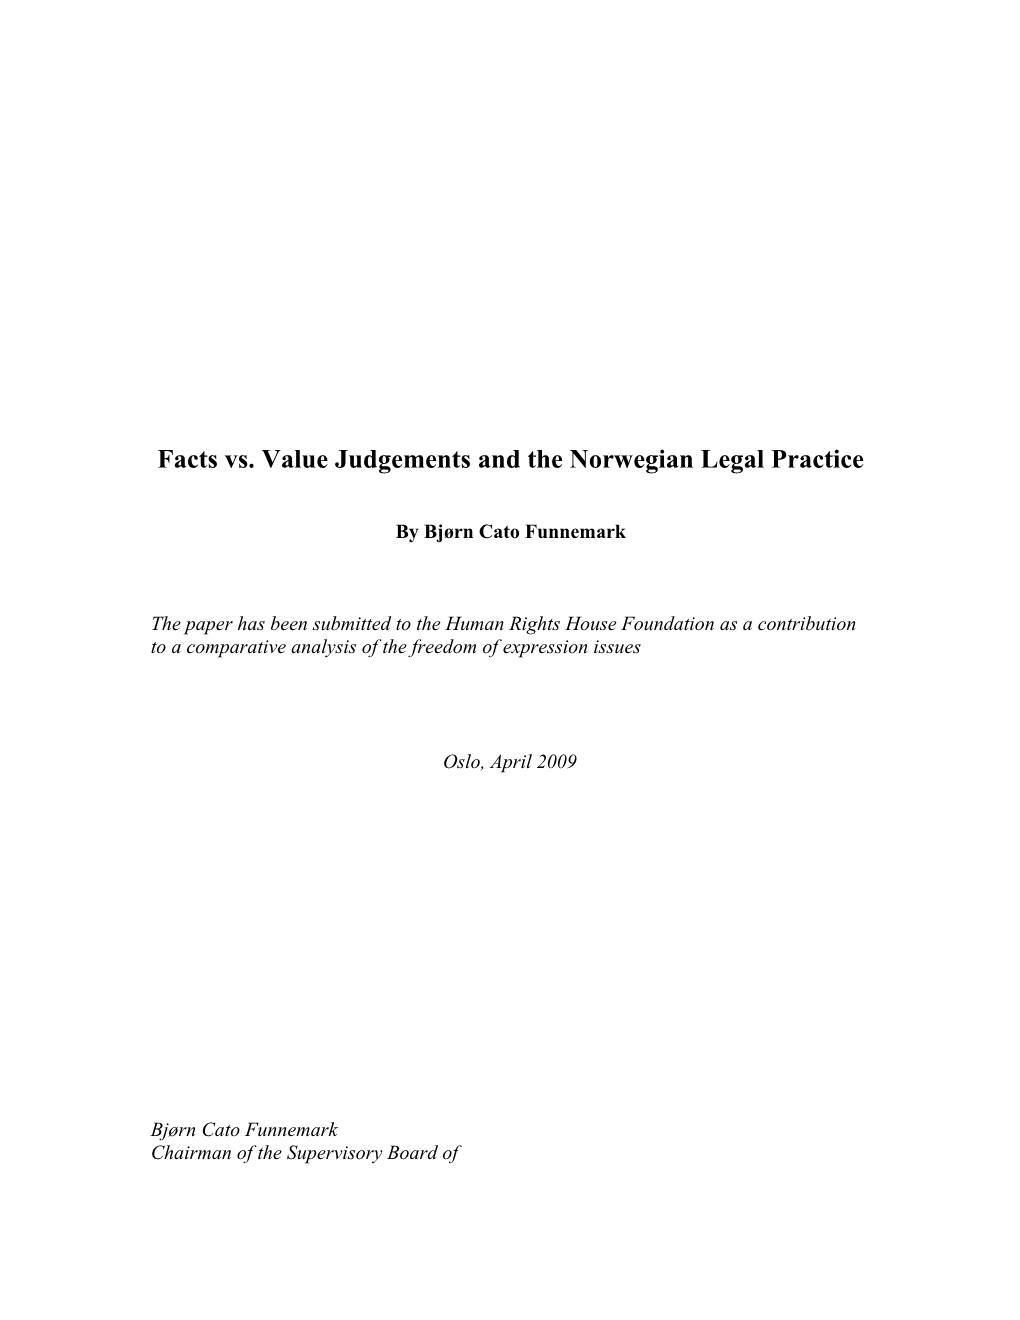 Facts Vs. Value Judgements and the Norwegian Legal Practice